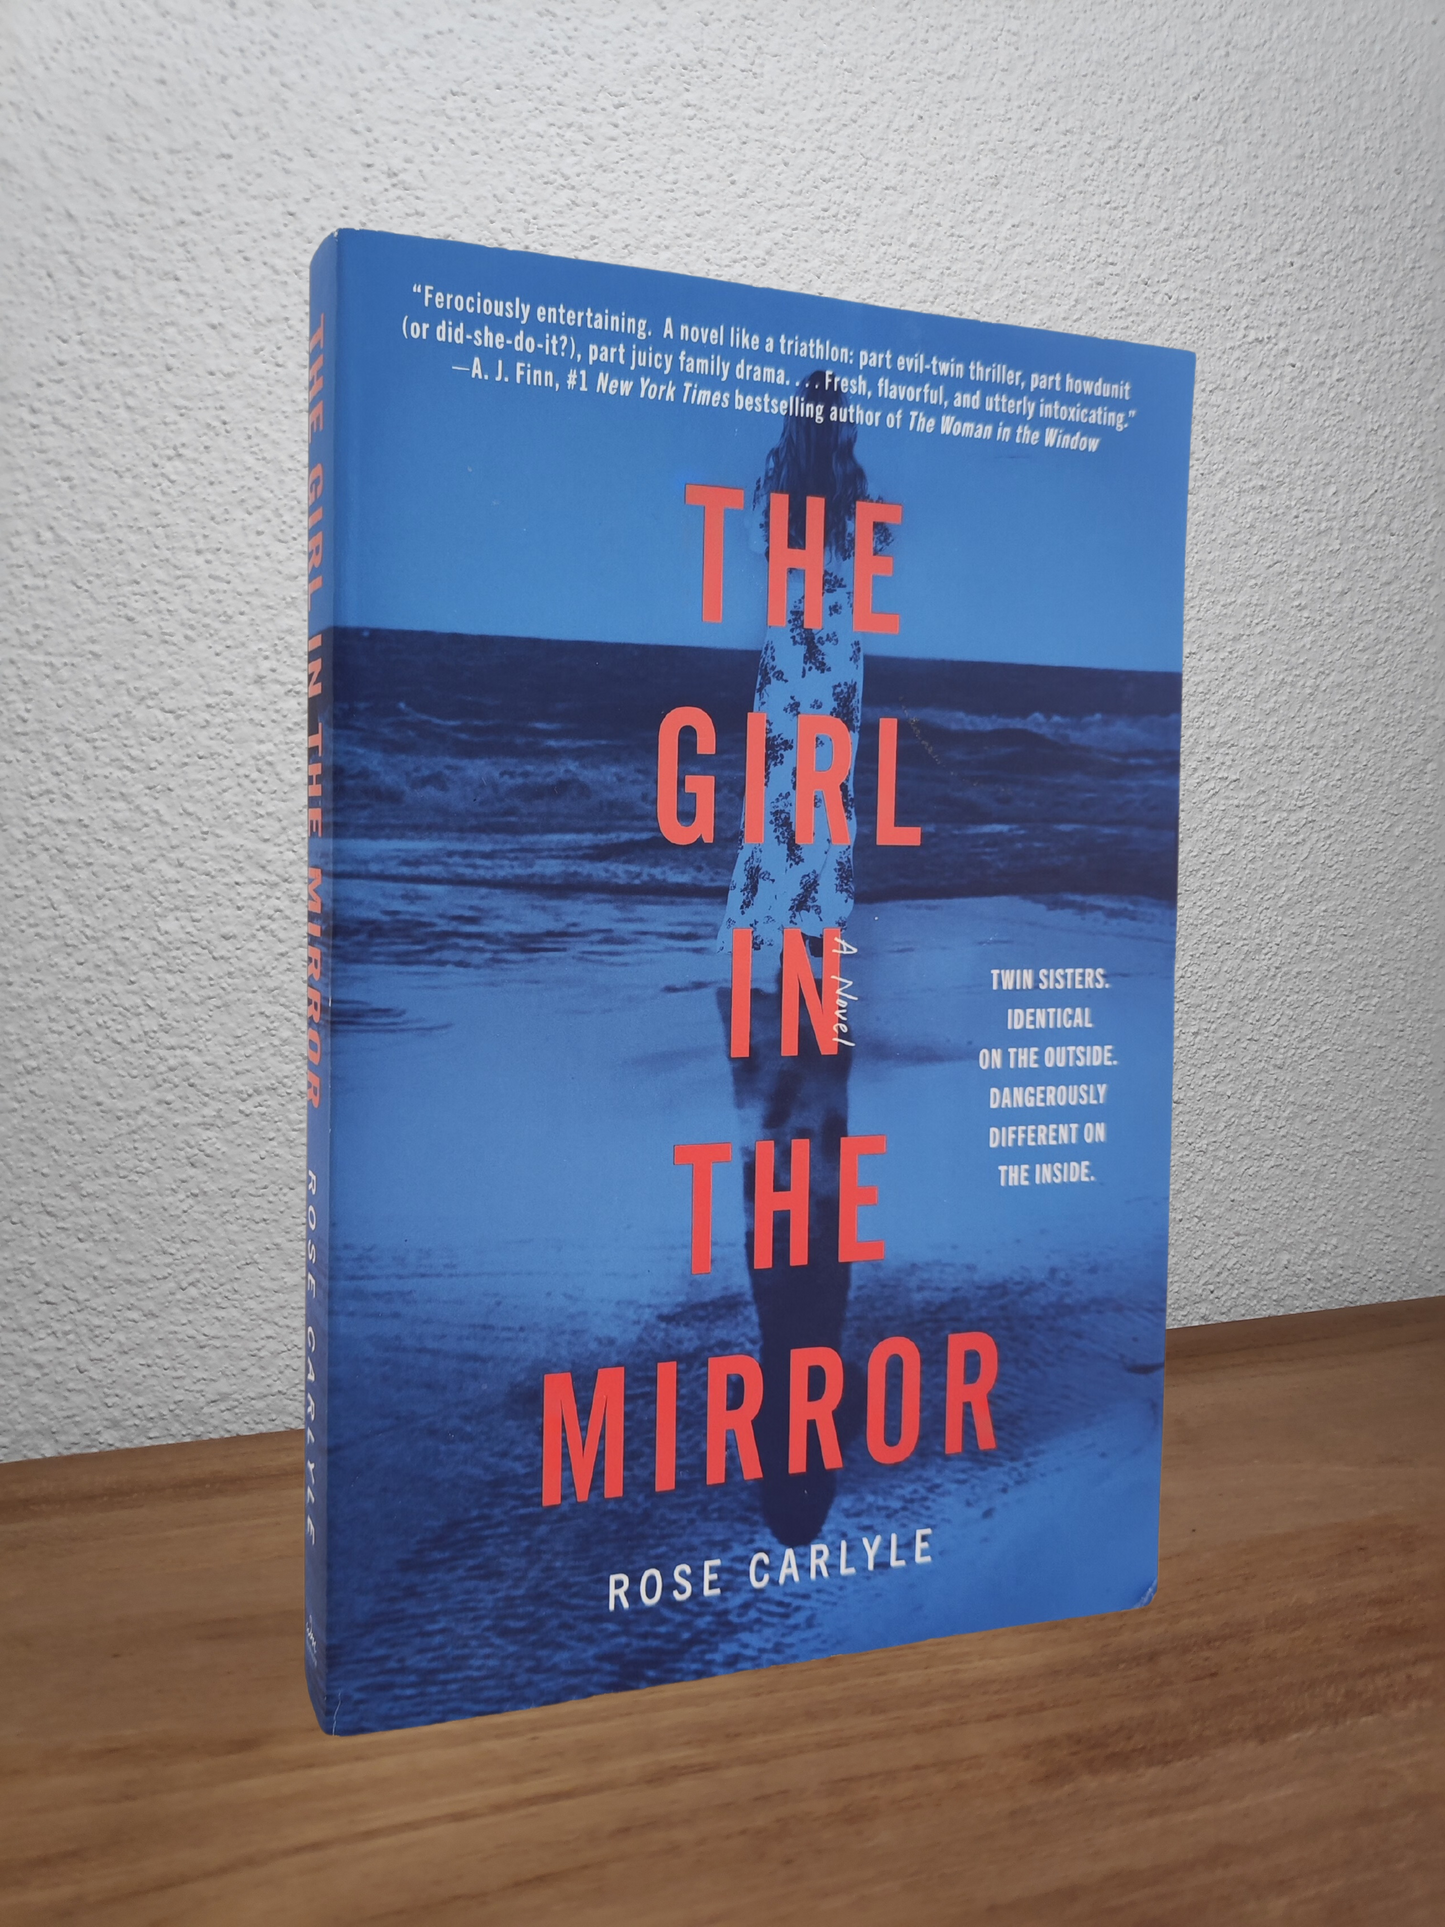 Rose Carlyle - The Girl in the Mirror